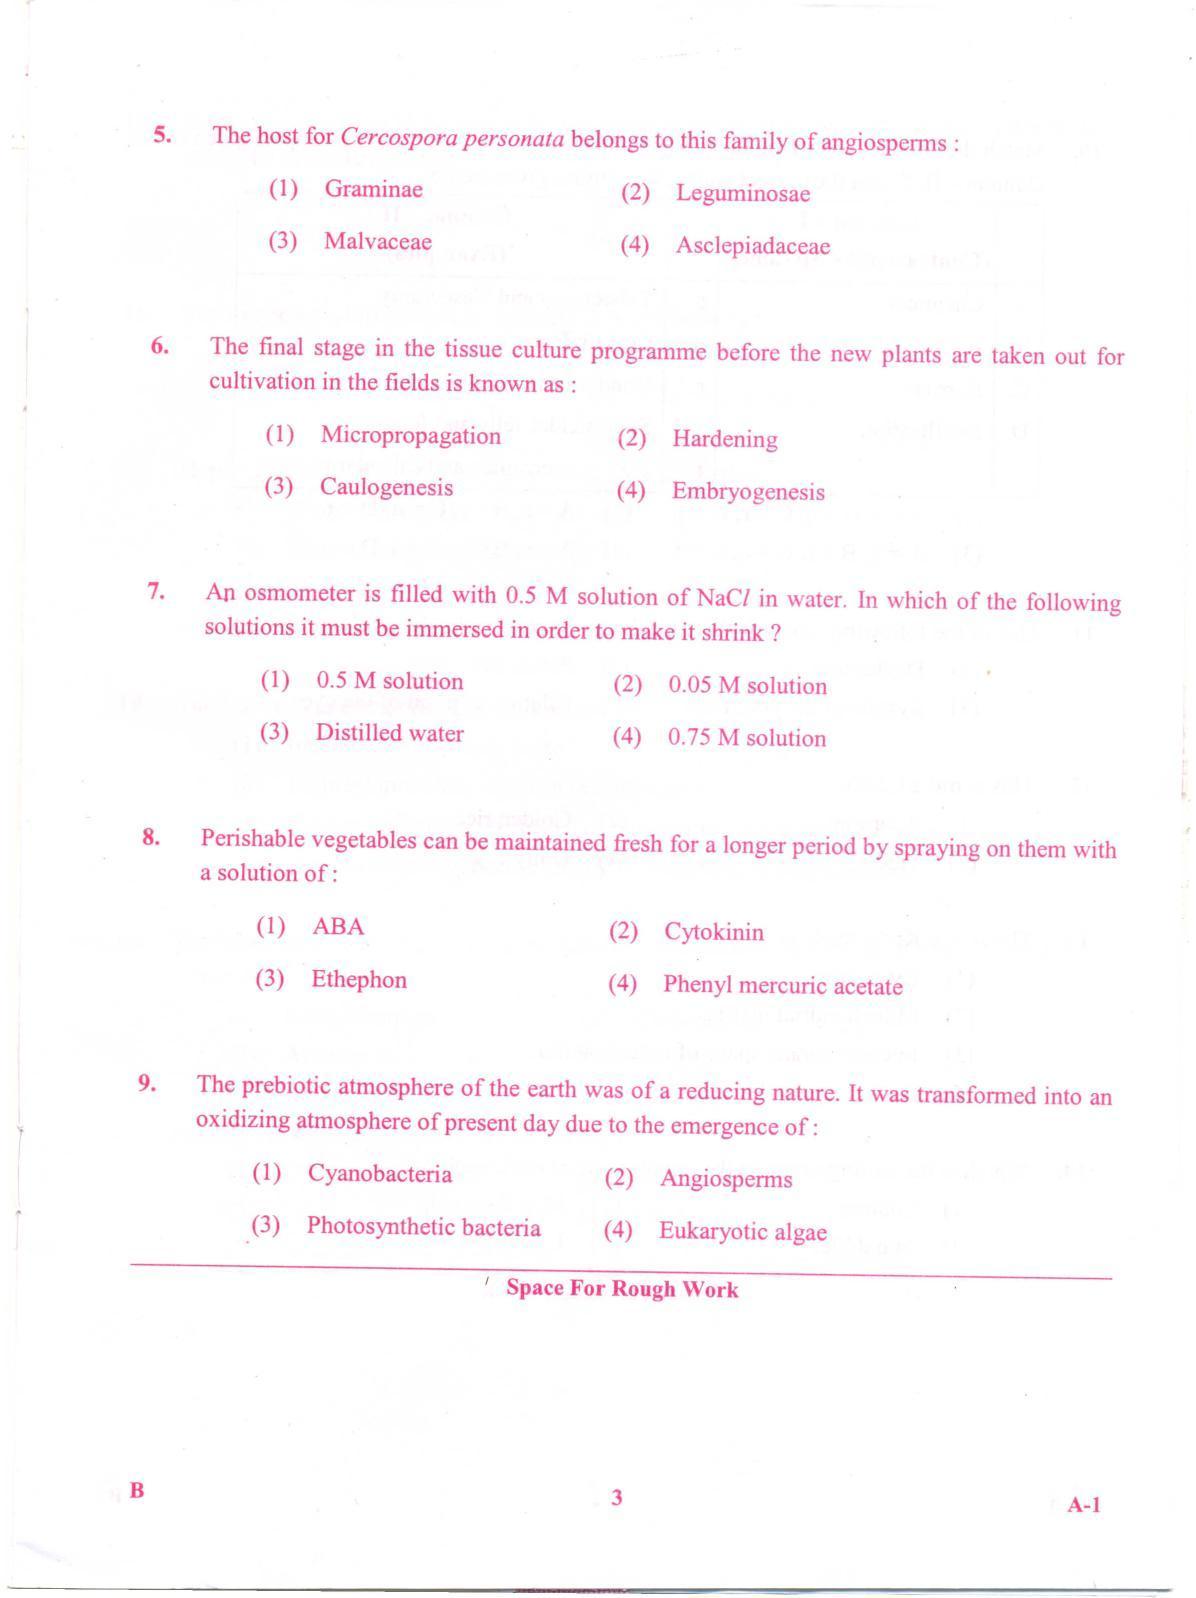 KCET Biology 2012 Question Papers - Page 3